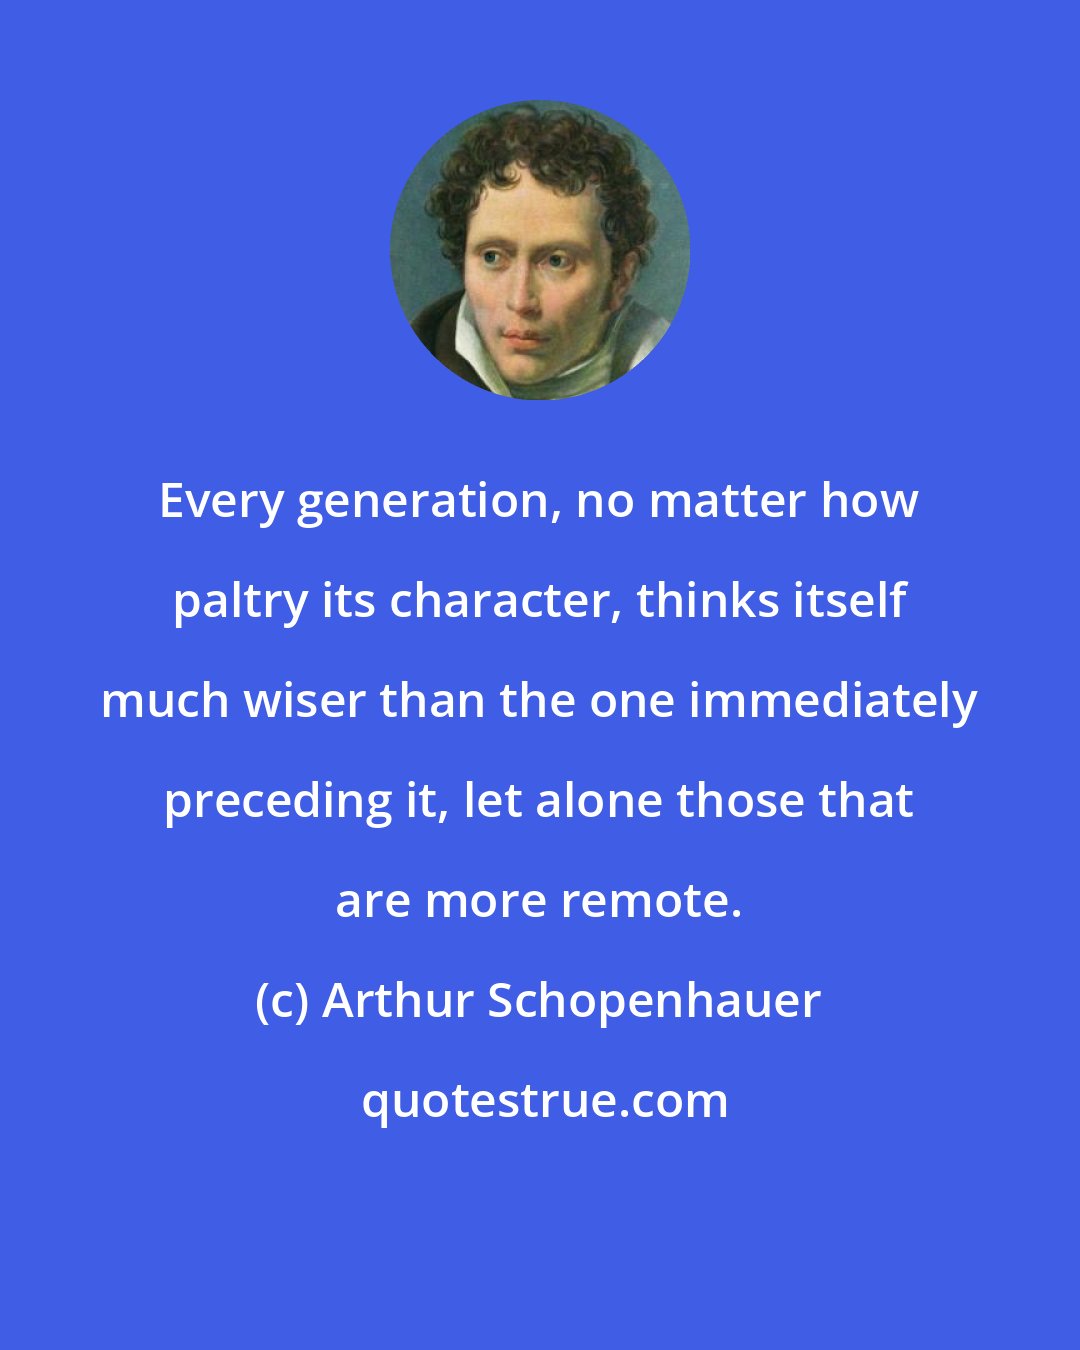 Arthur Schopenhauer: Every generation, no matter how paltry its character, thinks itself much wiser than the one immediately preceding it, let alone those that are more remote.